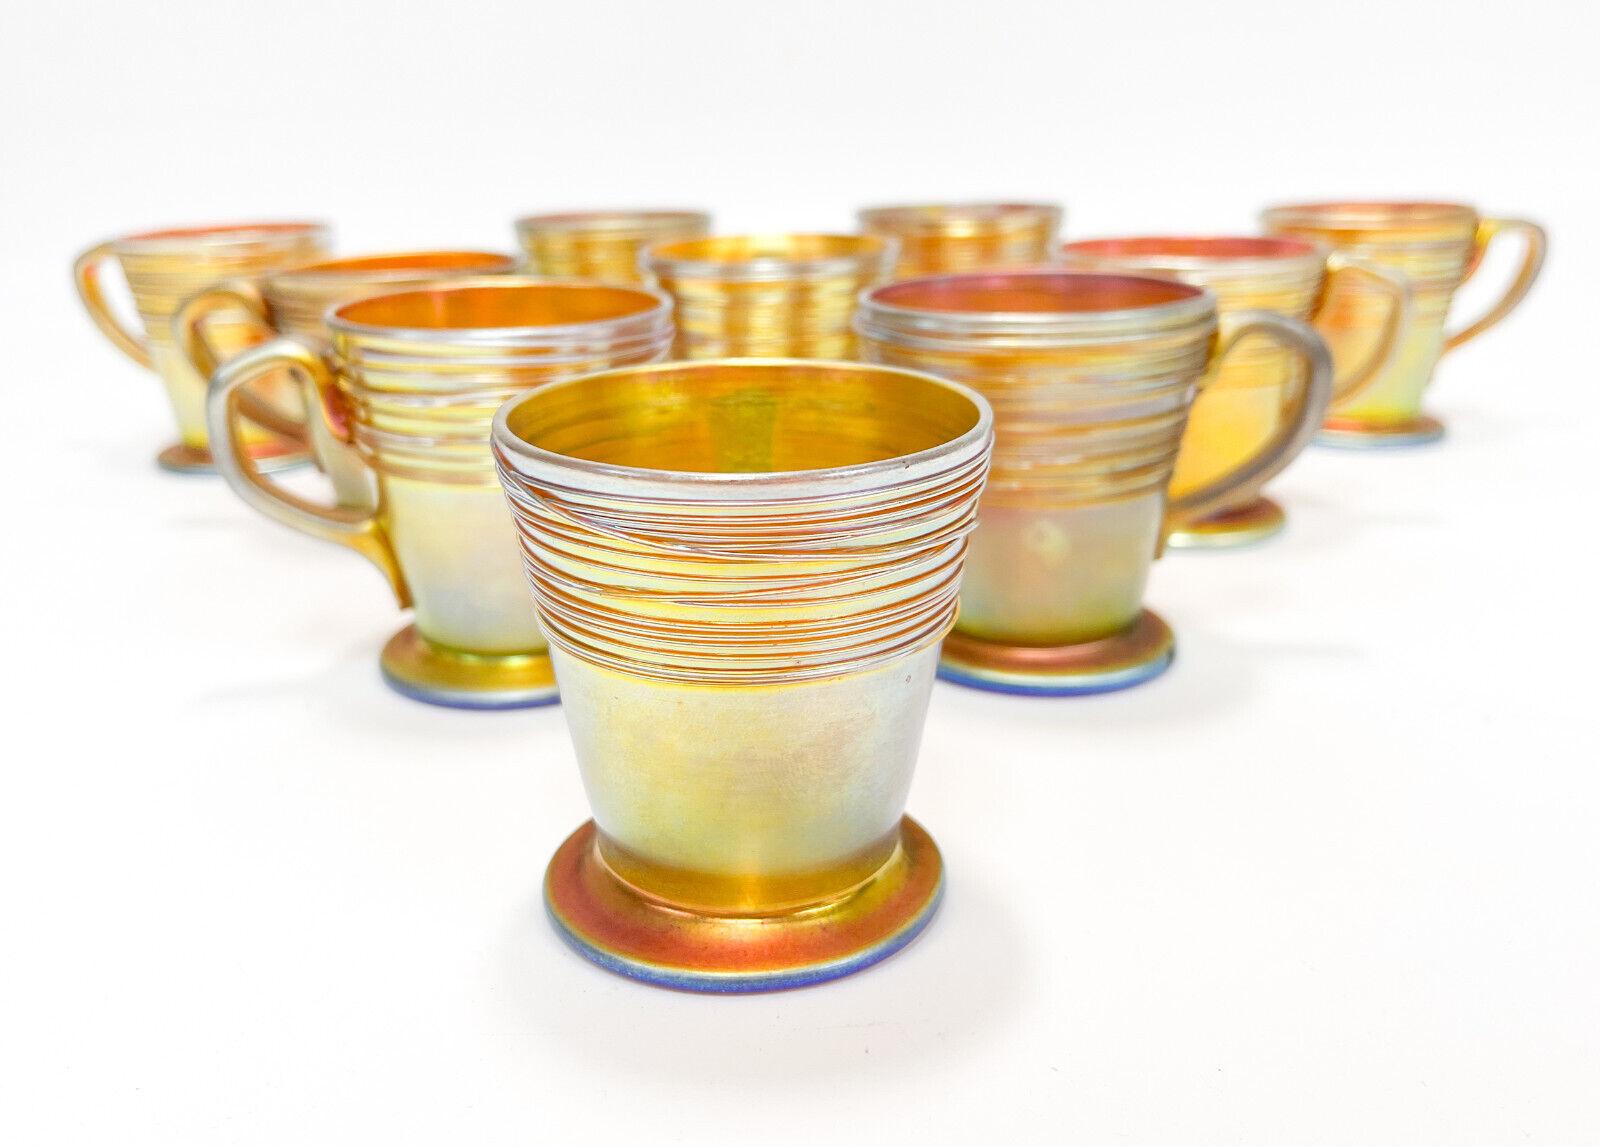  10 Steuben 4 ounce Gold Aurene Handled Threaded Cocktail Glass Cups #6333 In Good Condition For Sale In Gardena, CA